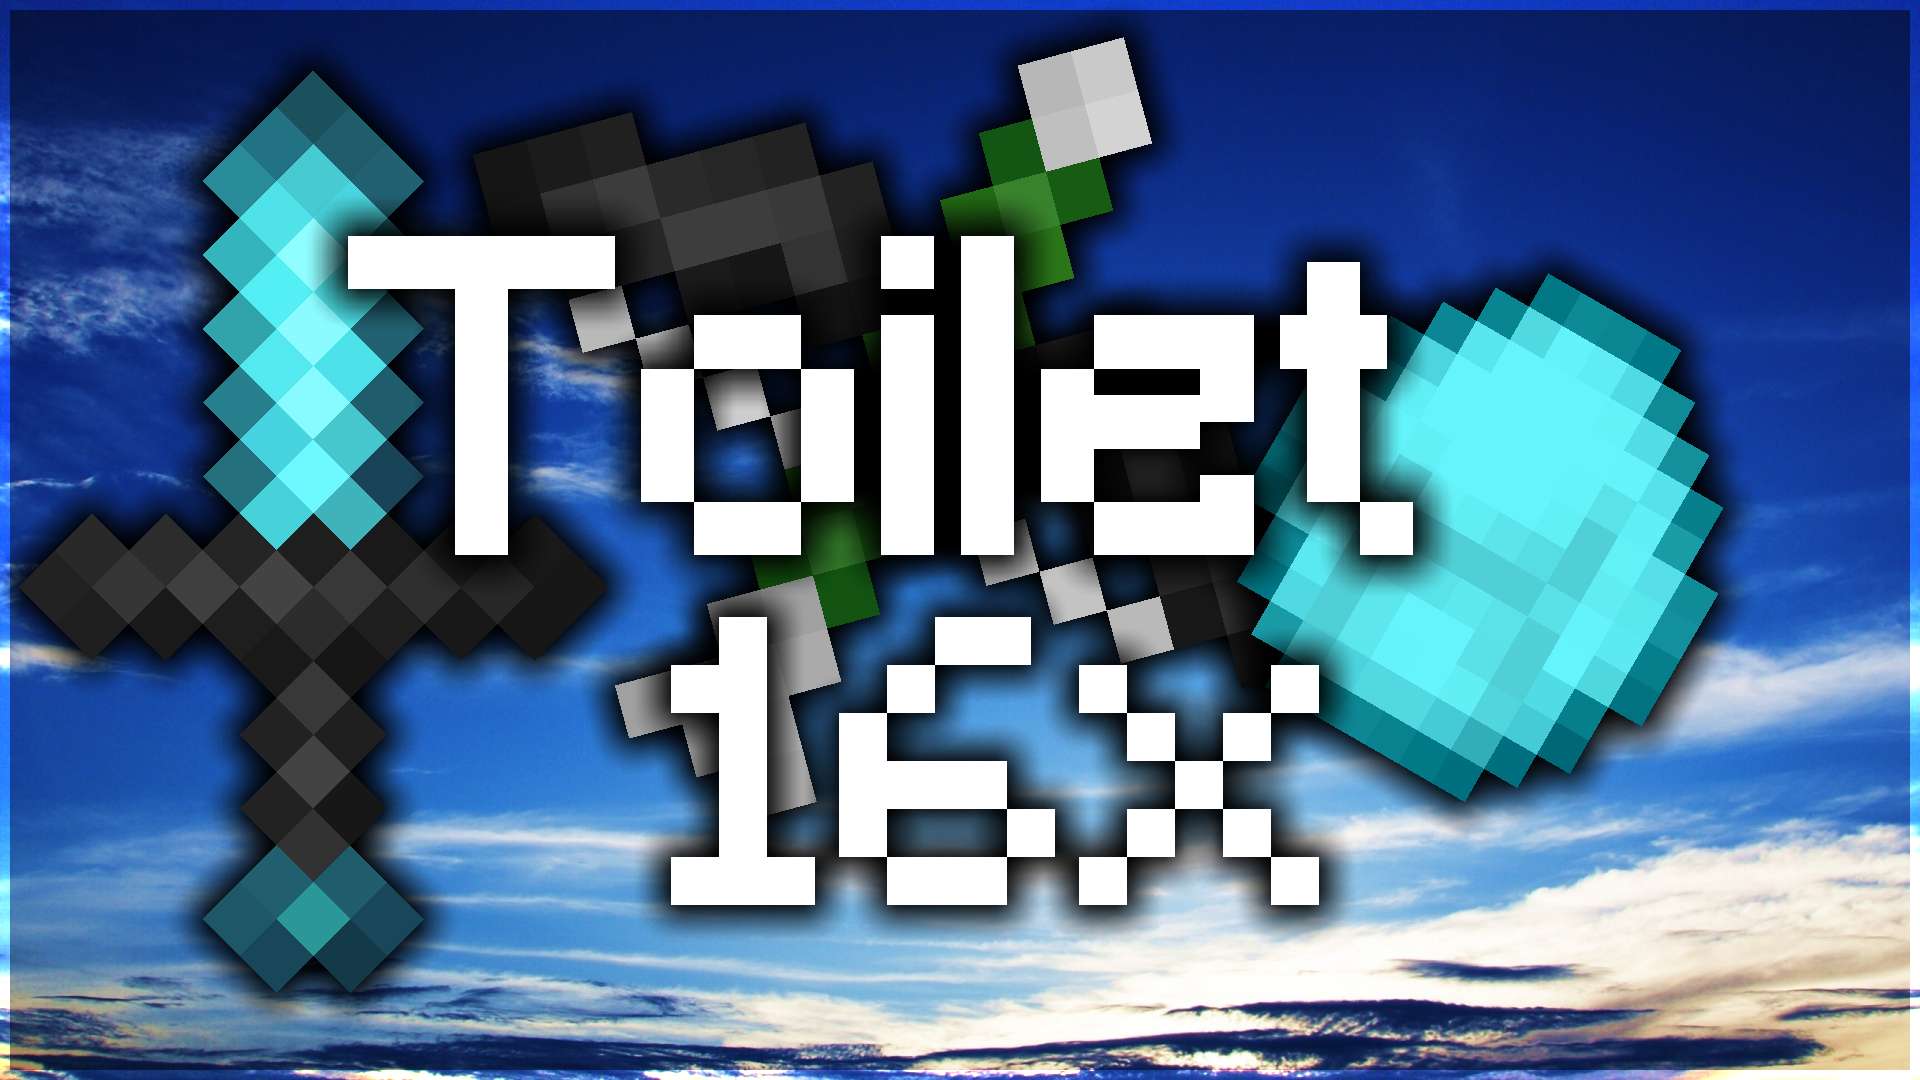 Toilet 16x by toileh on PvPRP